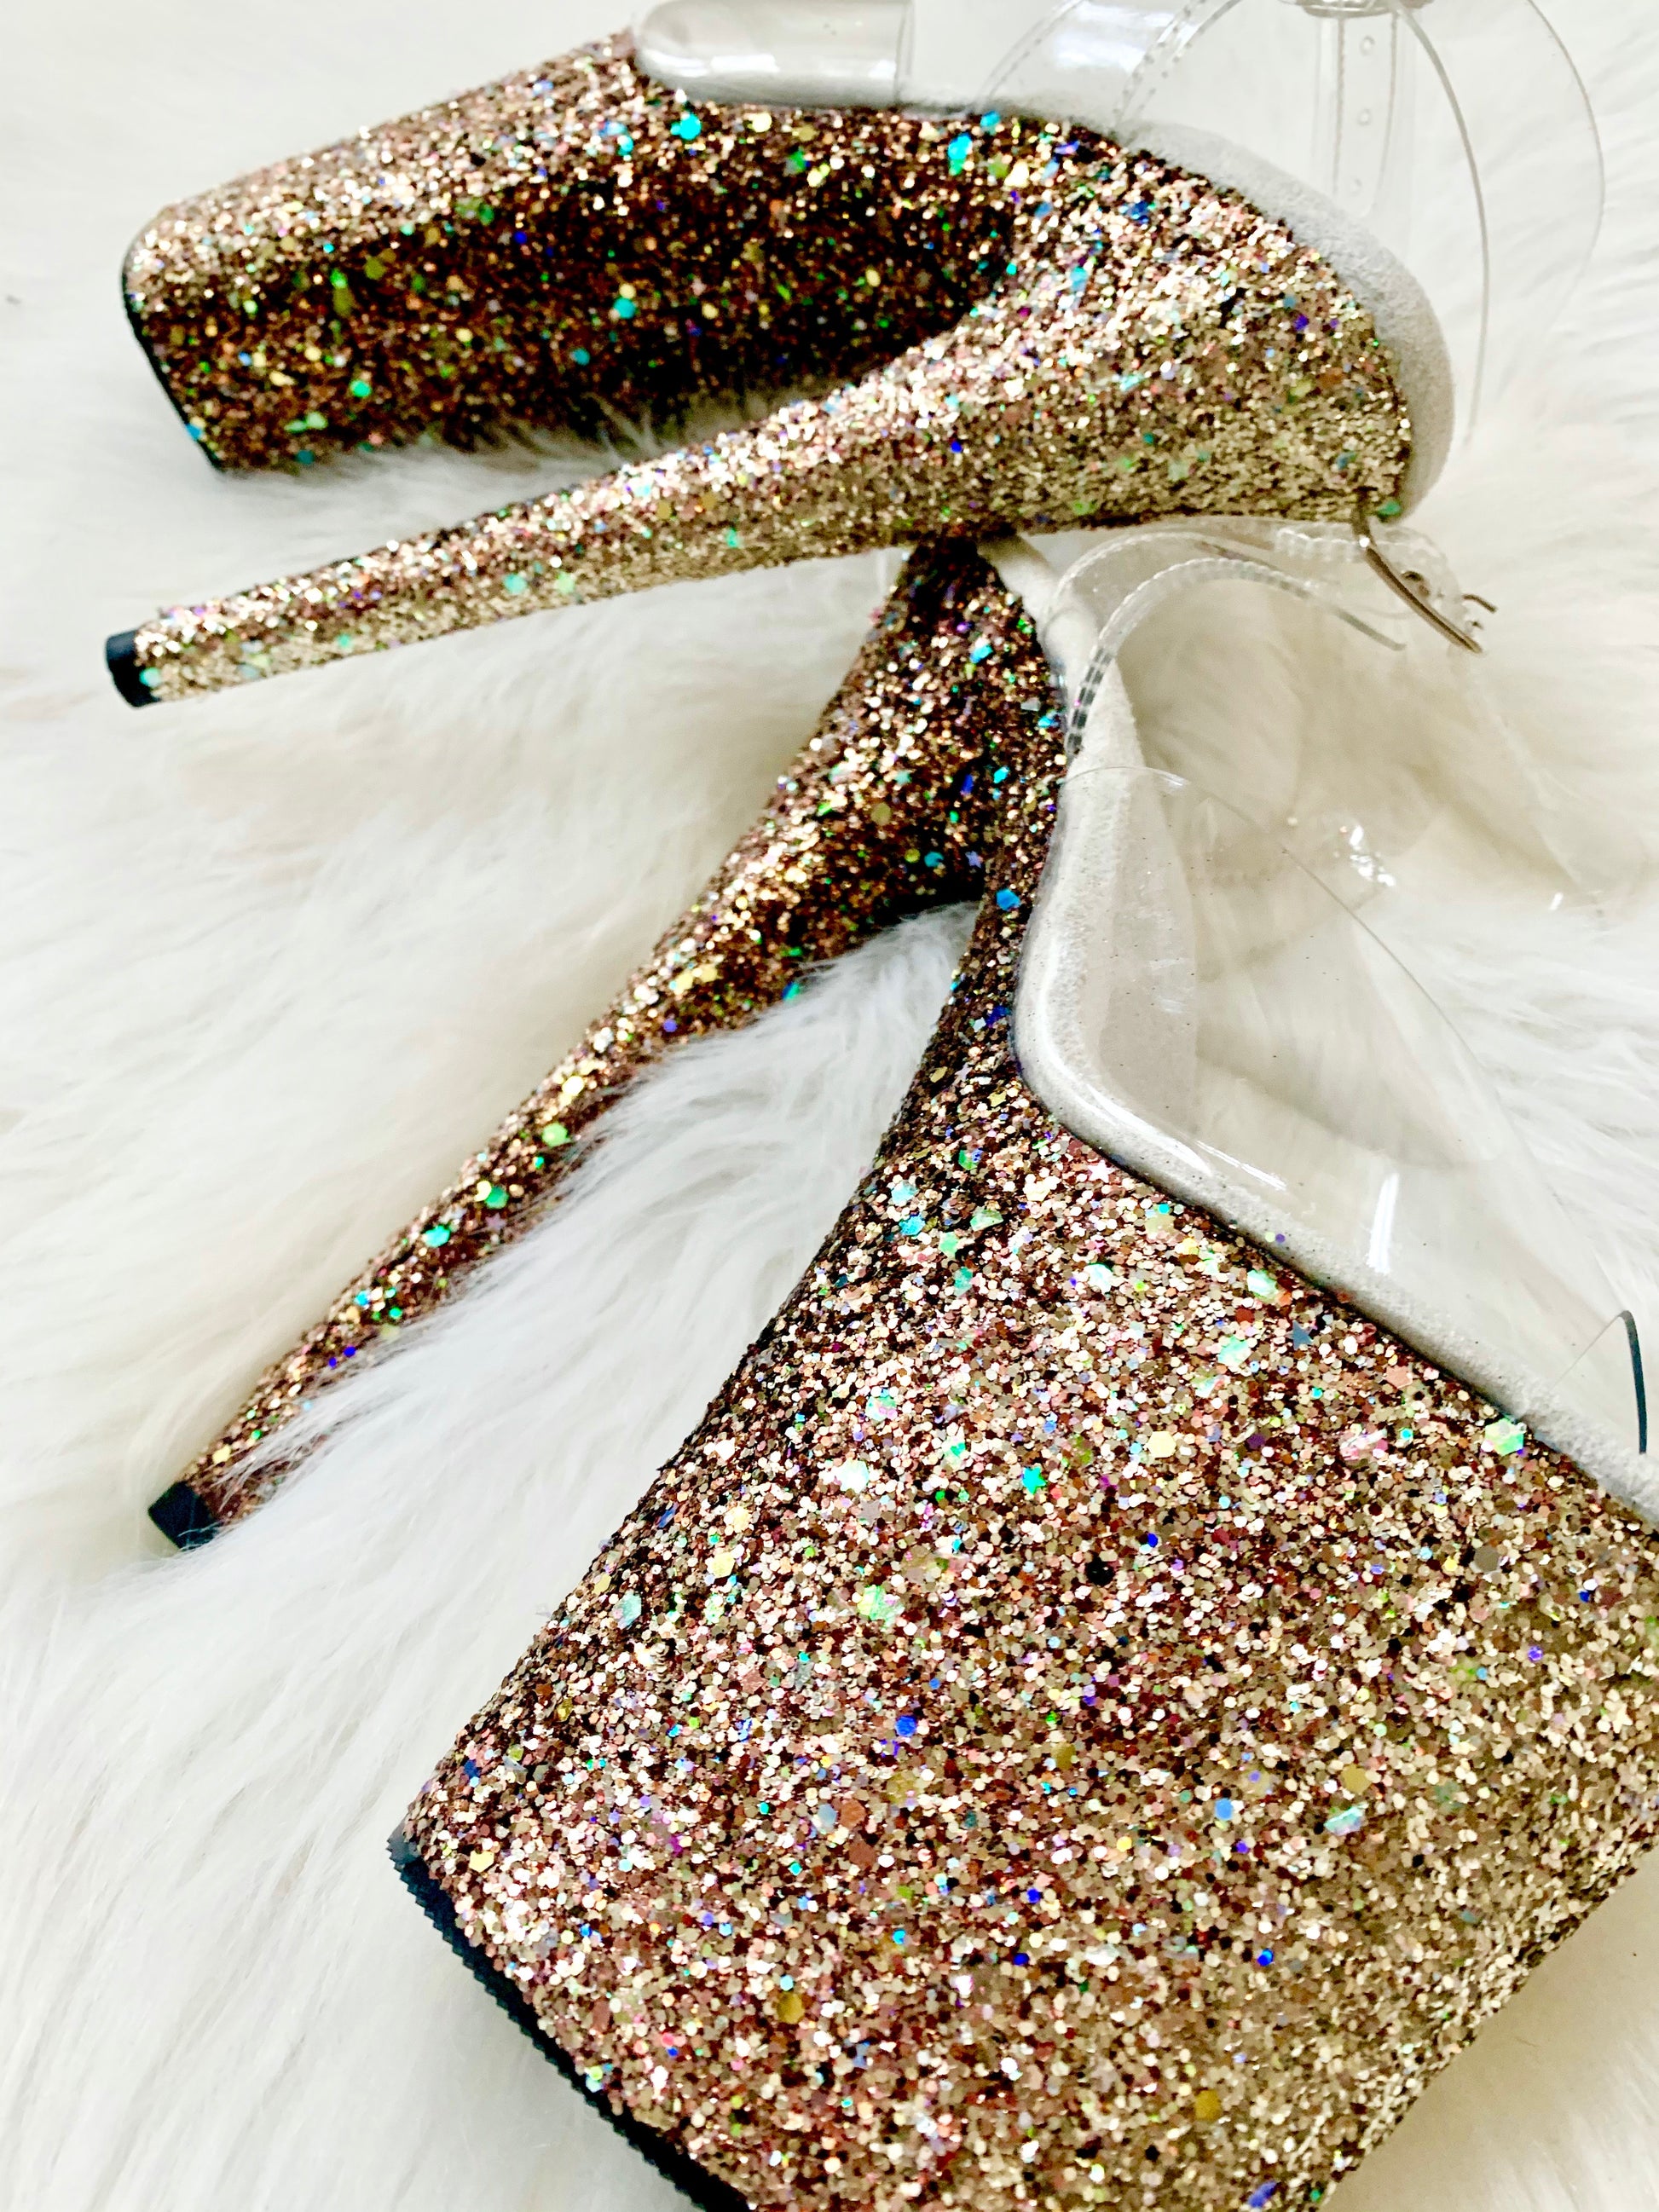 Platform heels with clear straps, and dual Ombre with gold, rose gold and bronze glitter. Shades of gold and rose gold glitter starting at the front of the platform, and back of the heels, blending to bronze glitter under the arch, and down the inside of the heels. White soles.